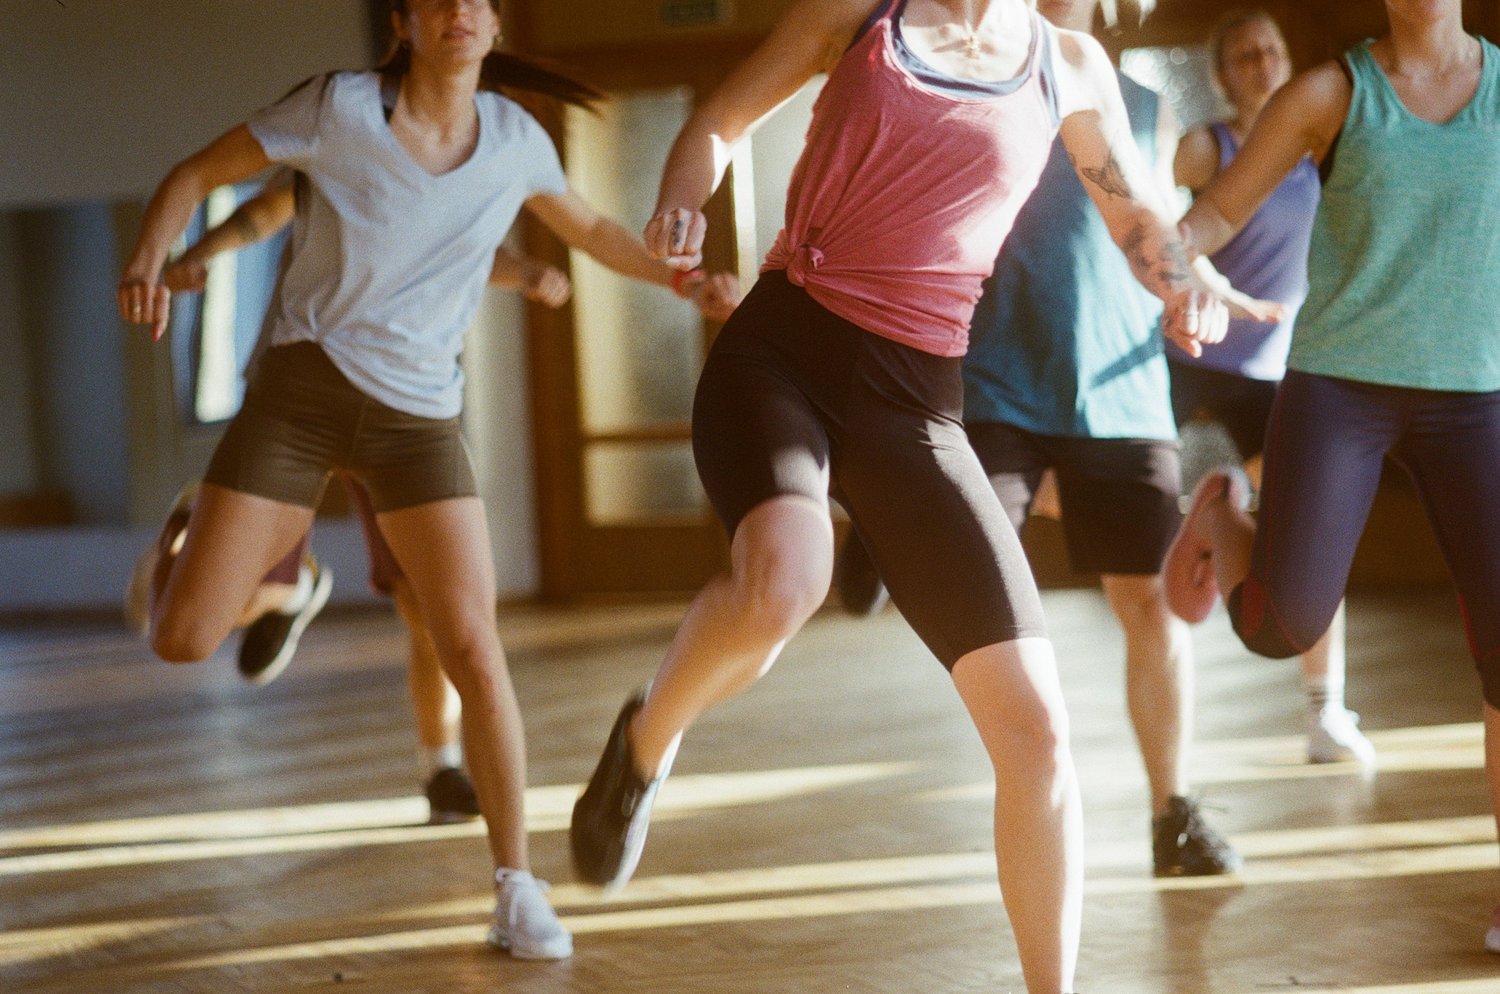 Multiple people in a wooden floor space exercising, lifting one leg.